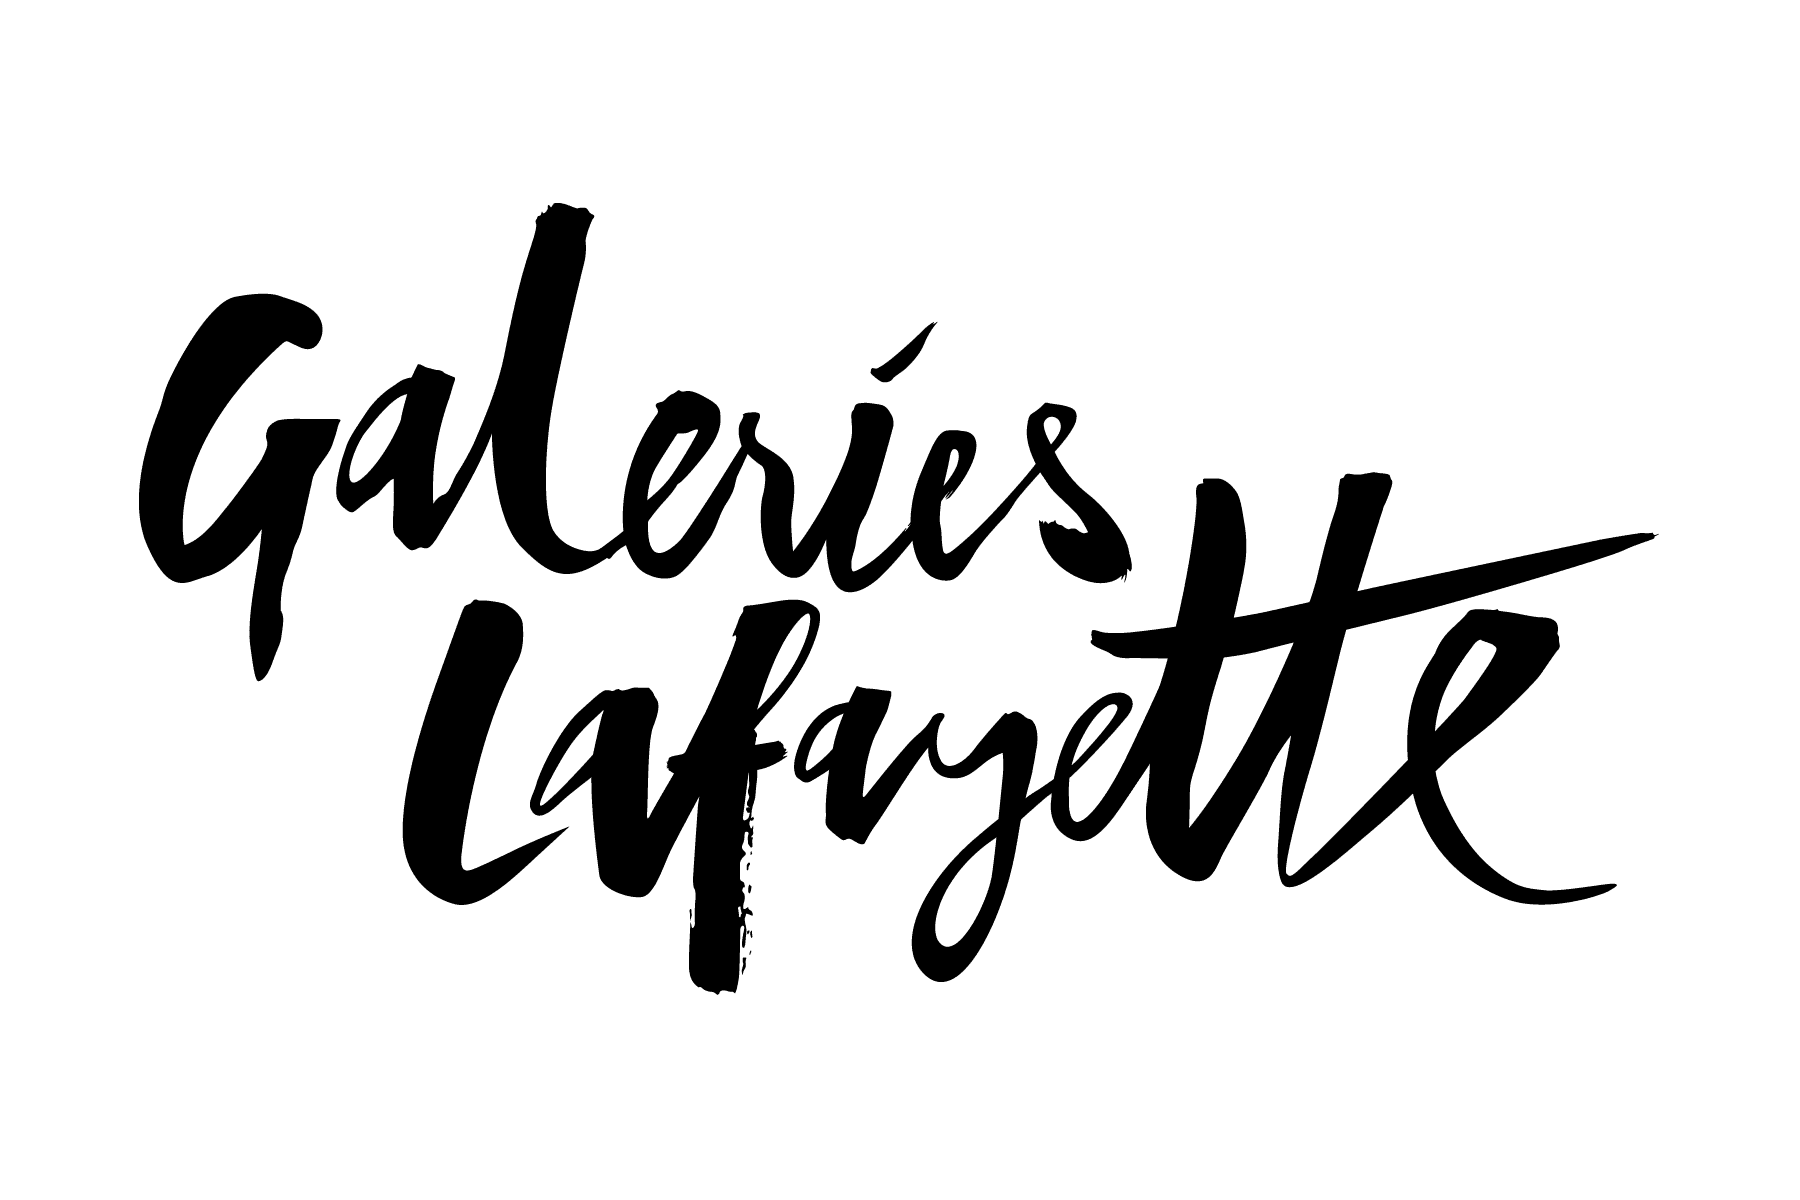 The Galeries Lafayette Sign and Logo. Paris, France Editorial